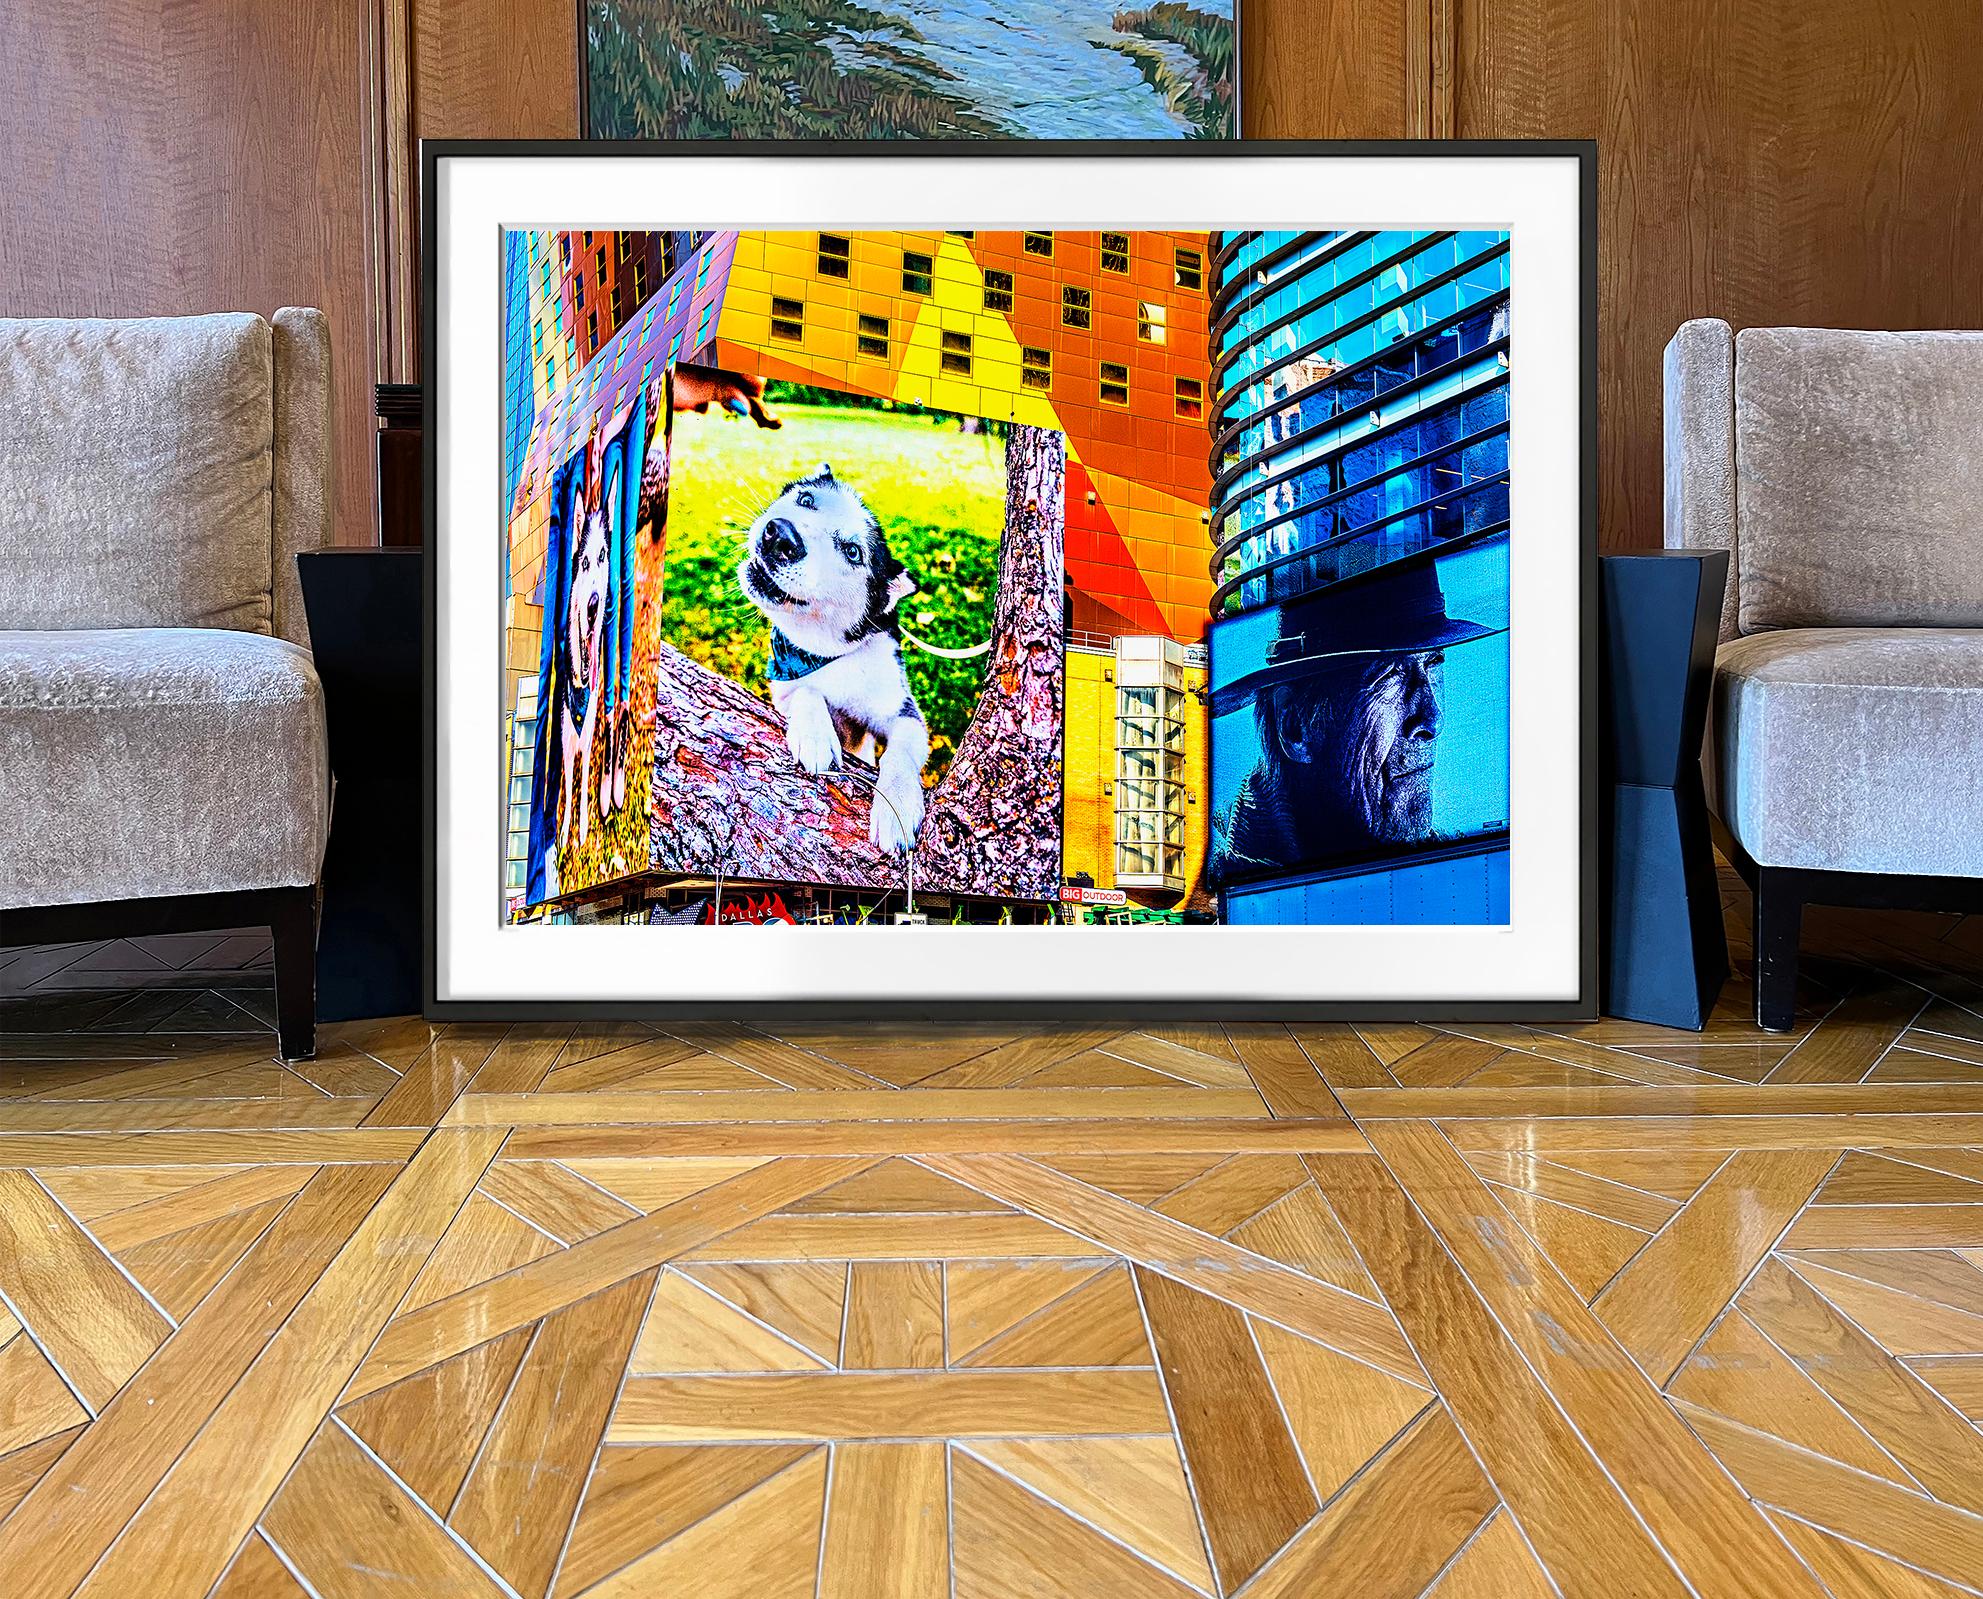 Assisted by the right angle and right light, Street Photographer Mitchell Funk designs an image of Times Square Billboards that is as abstract as it is representational. Two huskies ham it up next to American movie icon Clint Eastwood. So is the